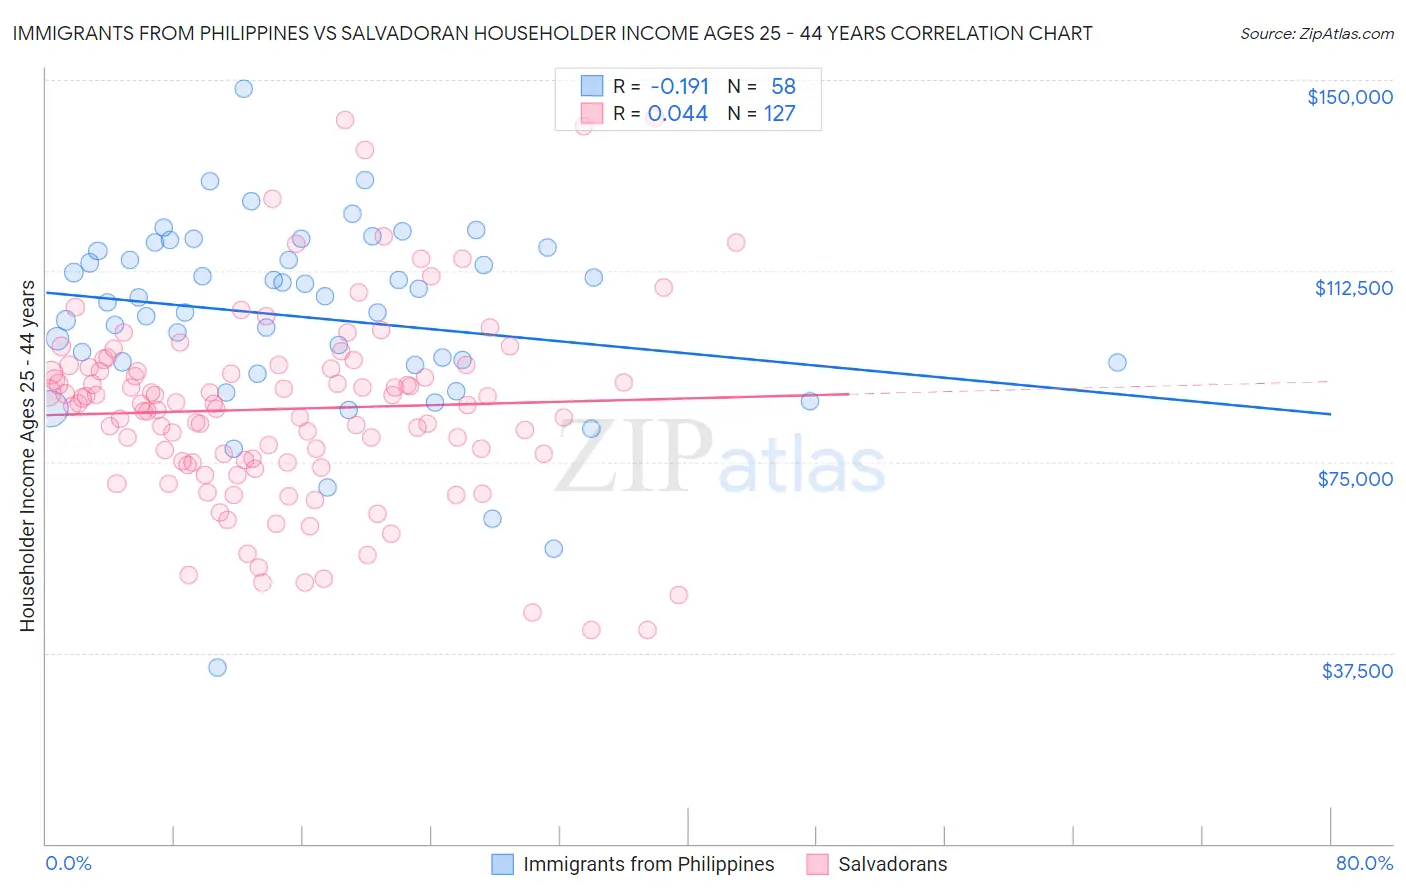 Immigrants from Philippines vs Salvadoran Householder Income Ages 25 - 44 years